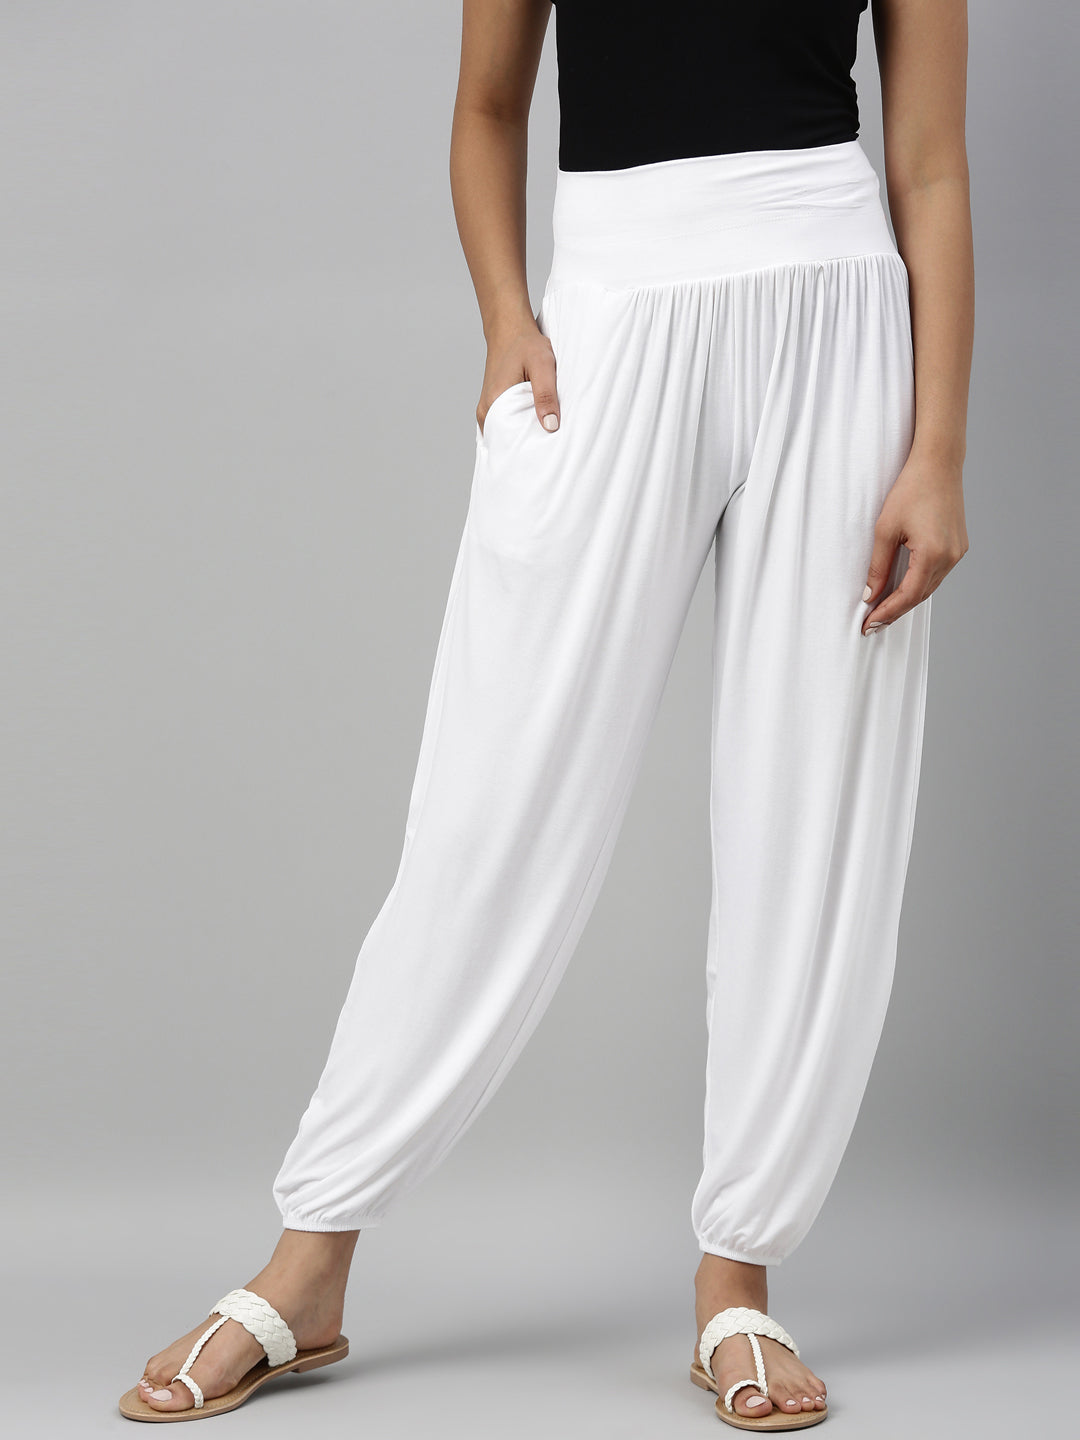 Women Trouser Drop Bottom Harem Pants With Drawstring Casual Loose Plus  Size Full Length Pants at Rs 220/piece | हैरम पैंट्स in New Delhi | ID:  21467867197